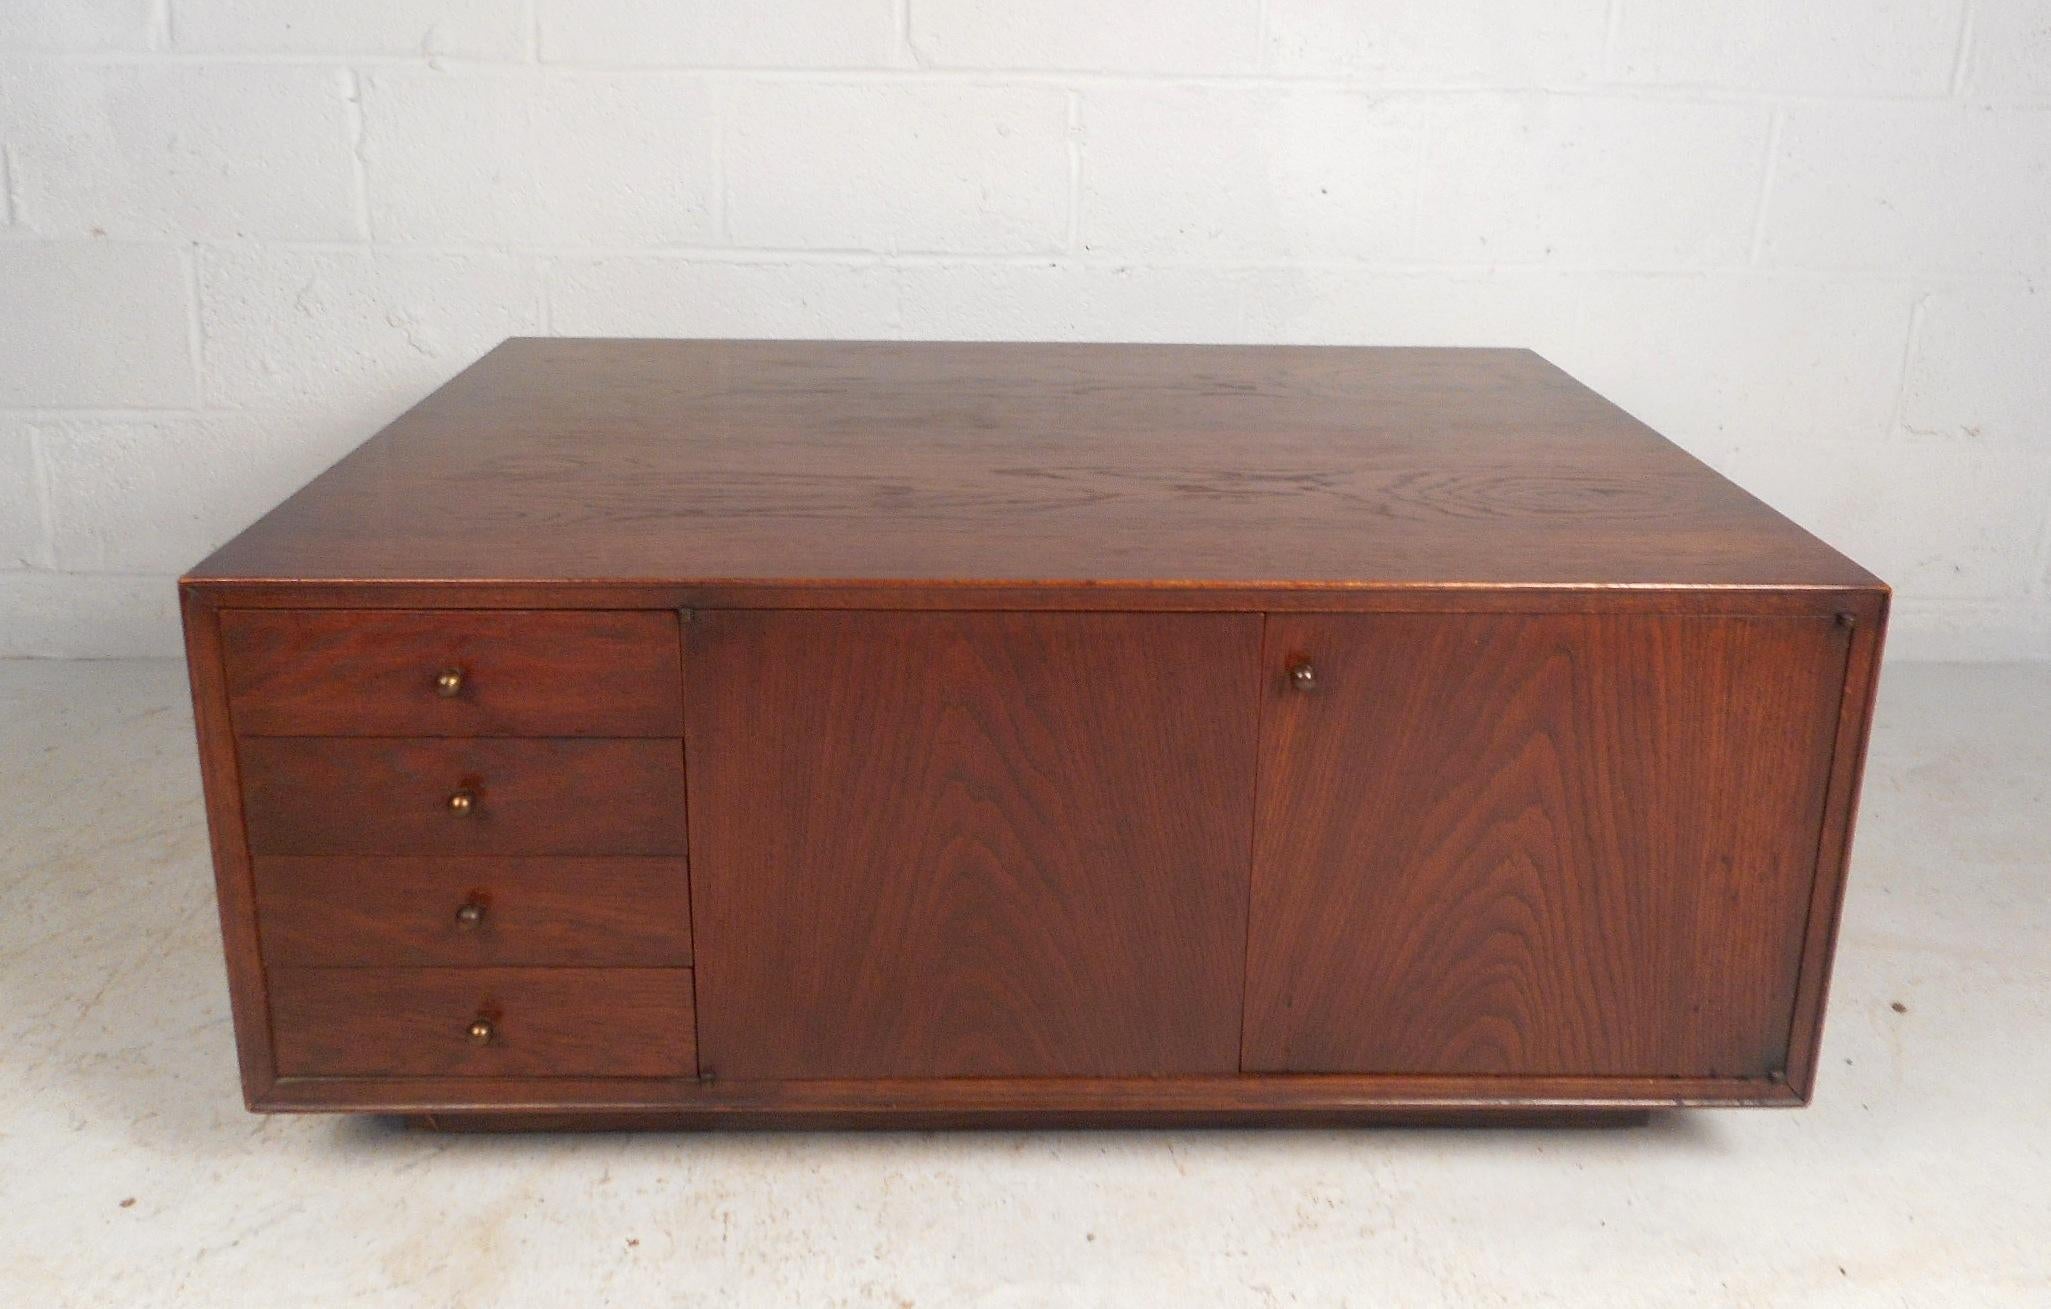 This beautiful vintage modern coffee table features plenty of room for storage within its four drawers and various large compartments. An unusual design that has a finished back with shelves and a large open compartment hidden behind two cabinet